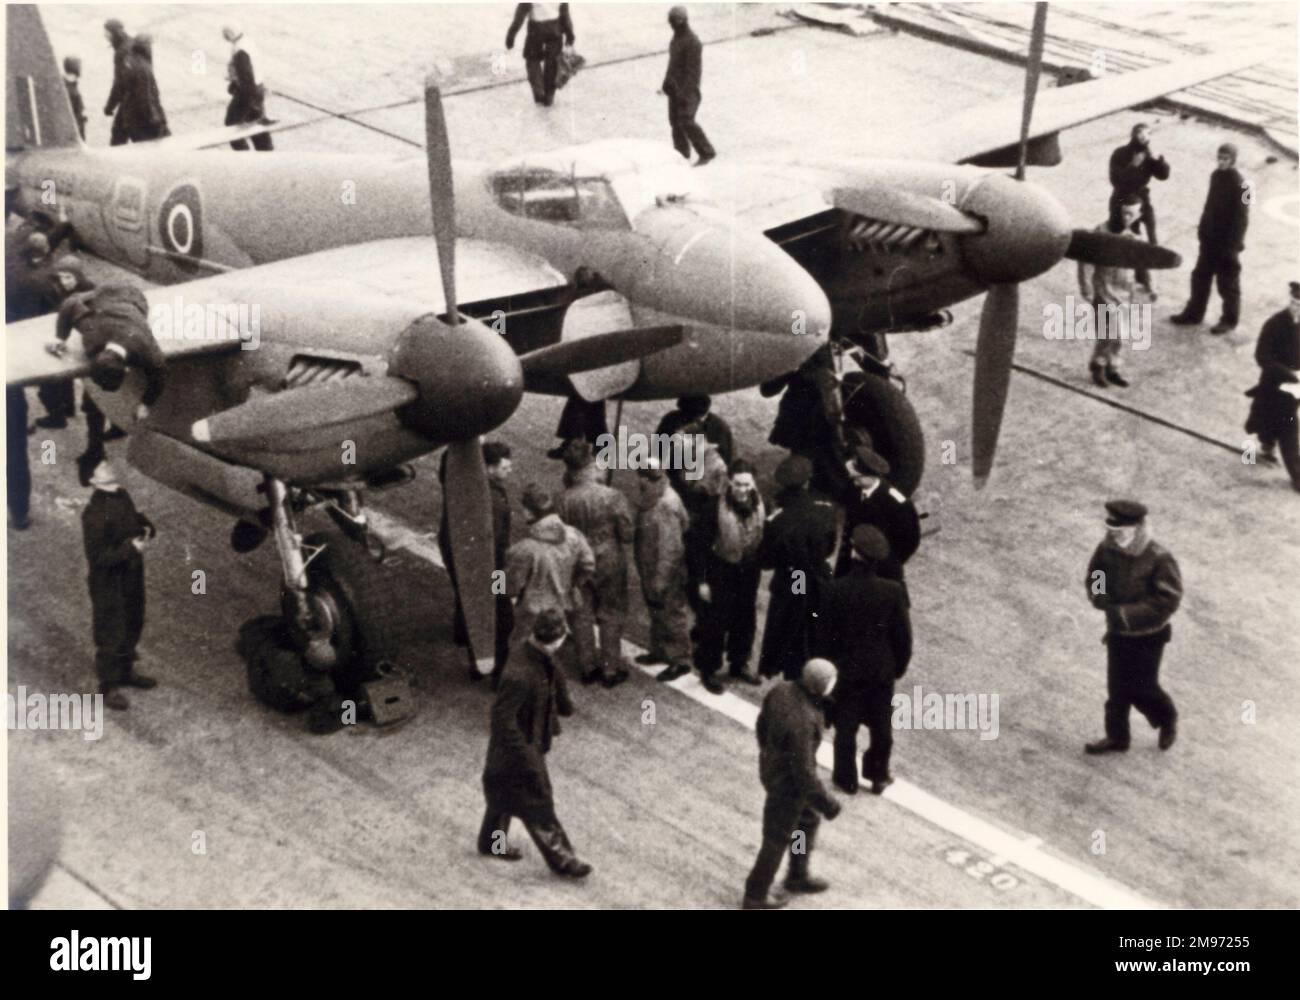 Modified de Havilland Mosquito FBVI, LR359, which made the first twin-engined carrier-borne landing on to HMS Indefatigable on 25 March 1944 piloted by Lt Cdr Eric Brown. Stock Photo